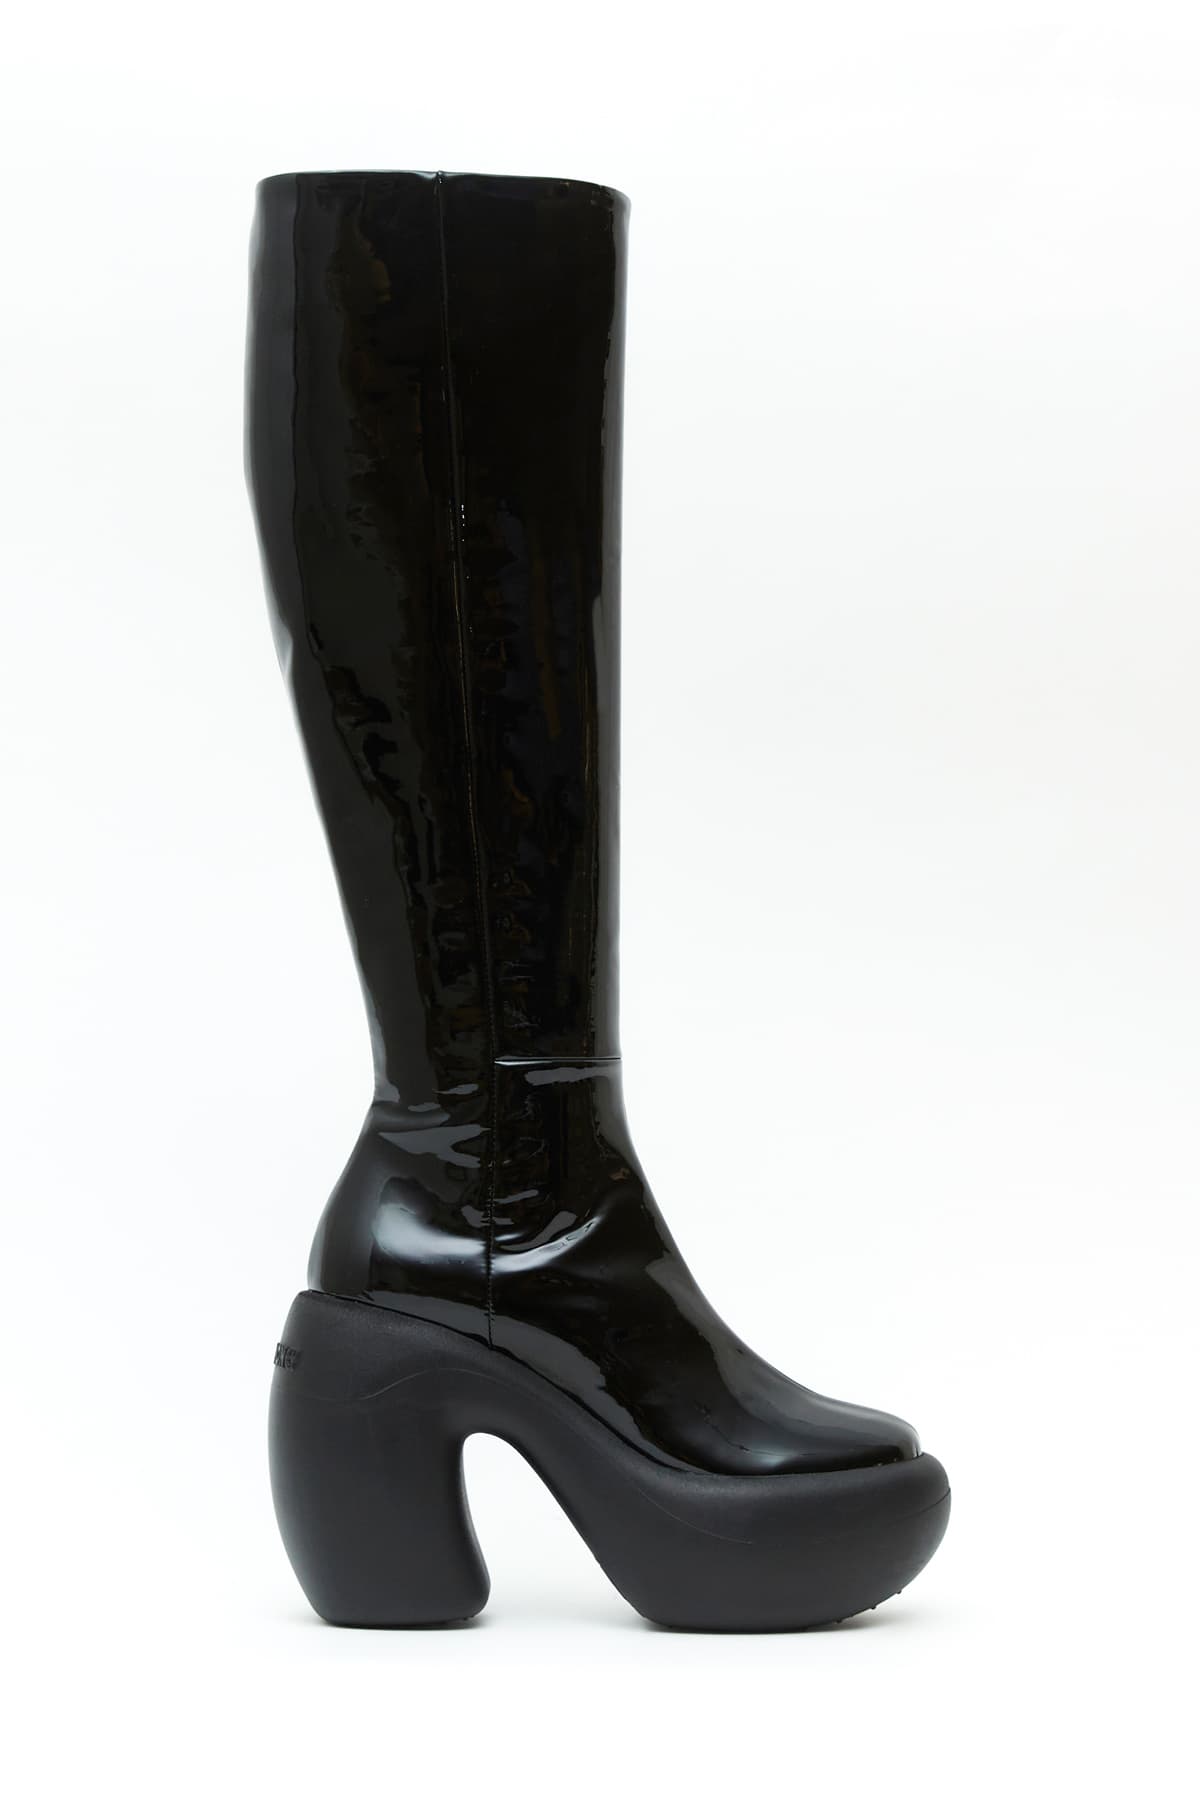 Sideveiw of Honey Bubble Boot in black from the Haus of Honey fall-winter 2023-24